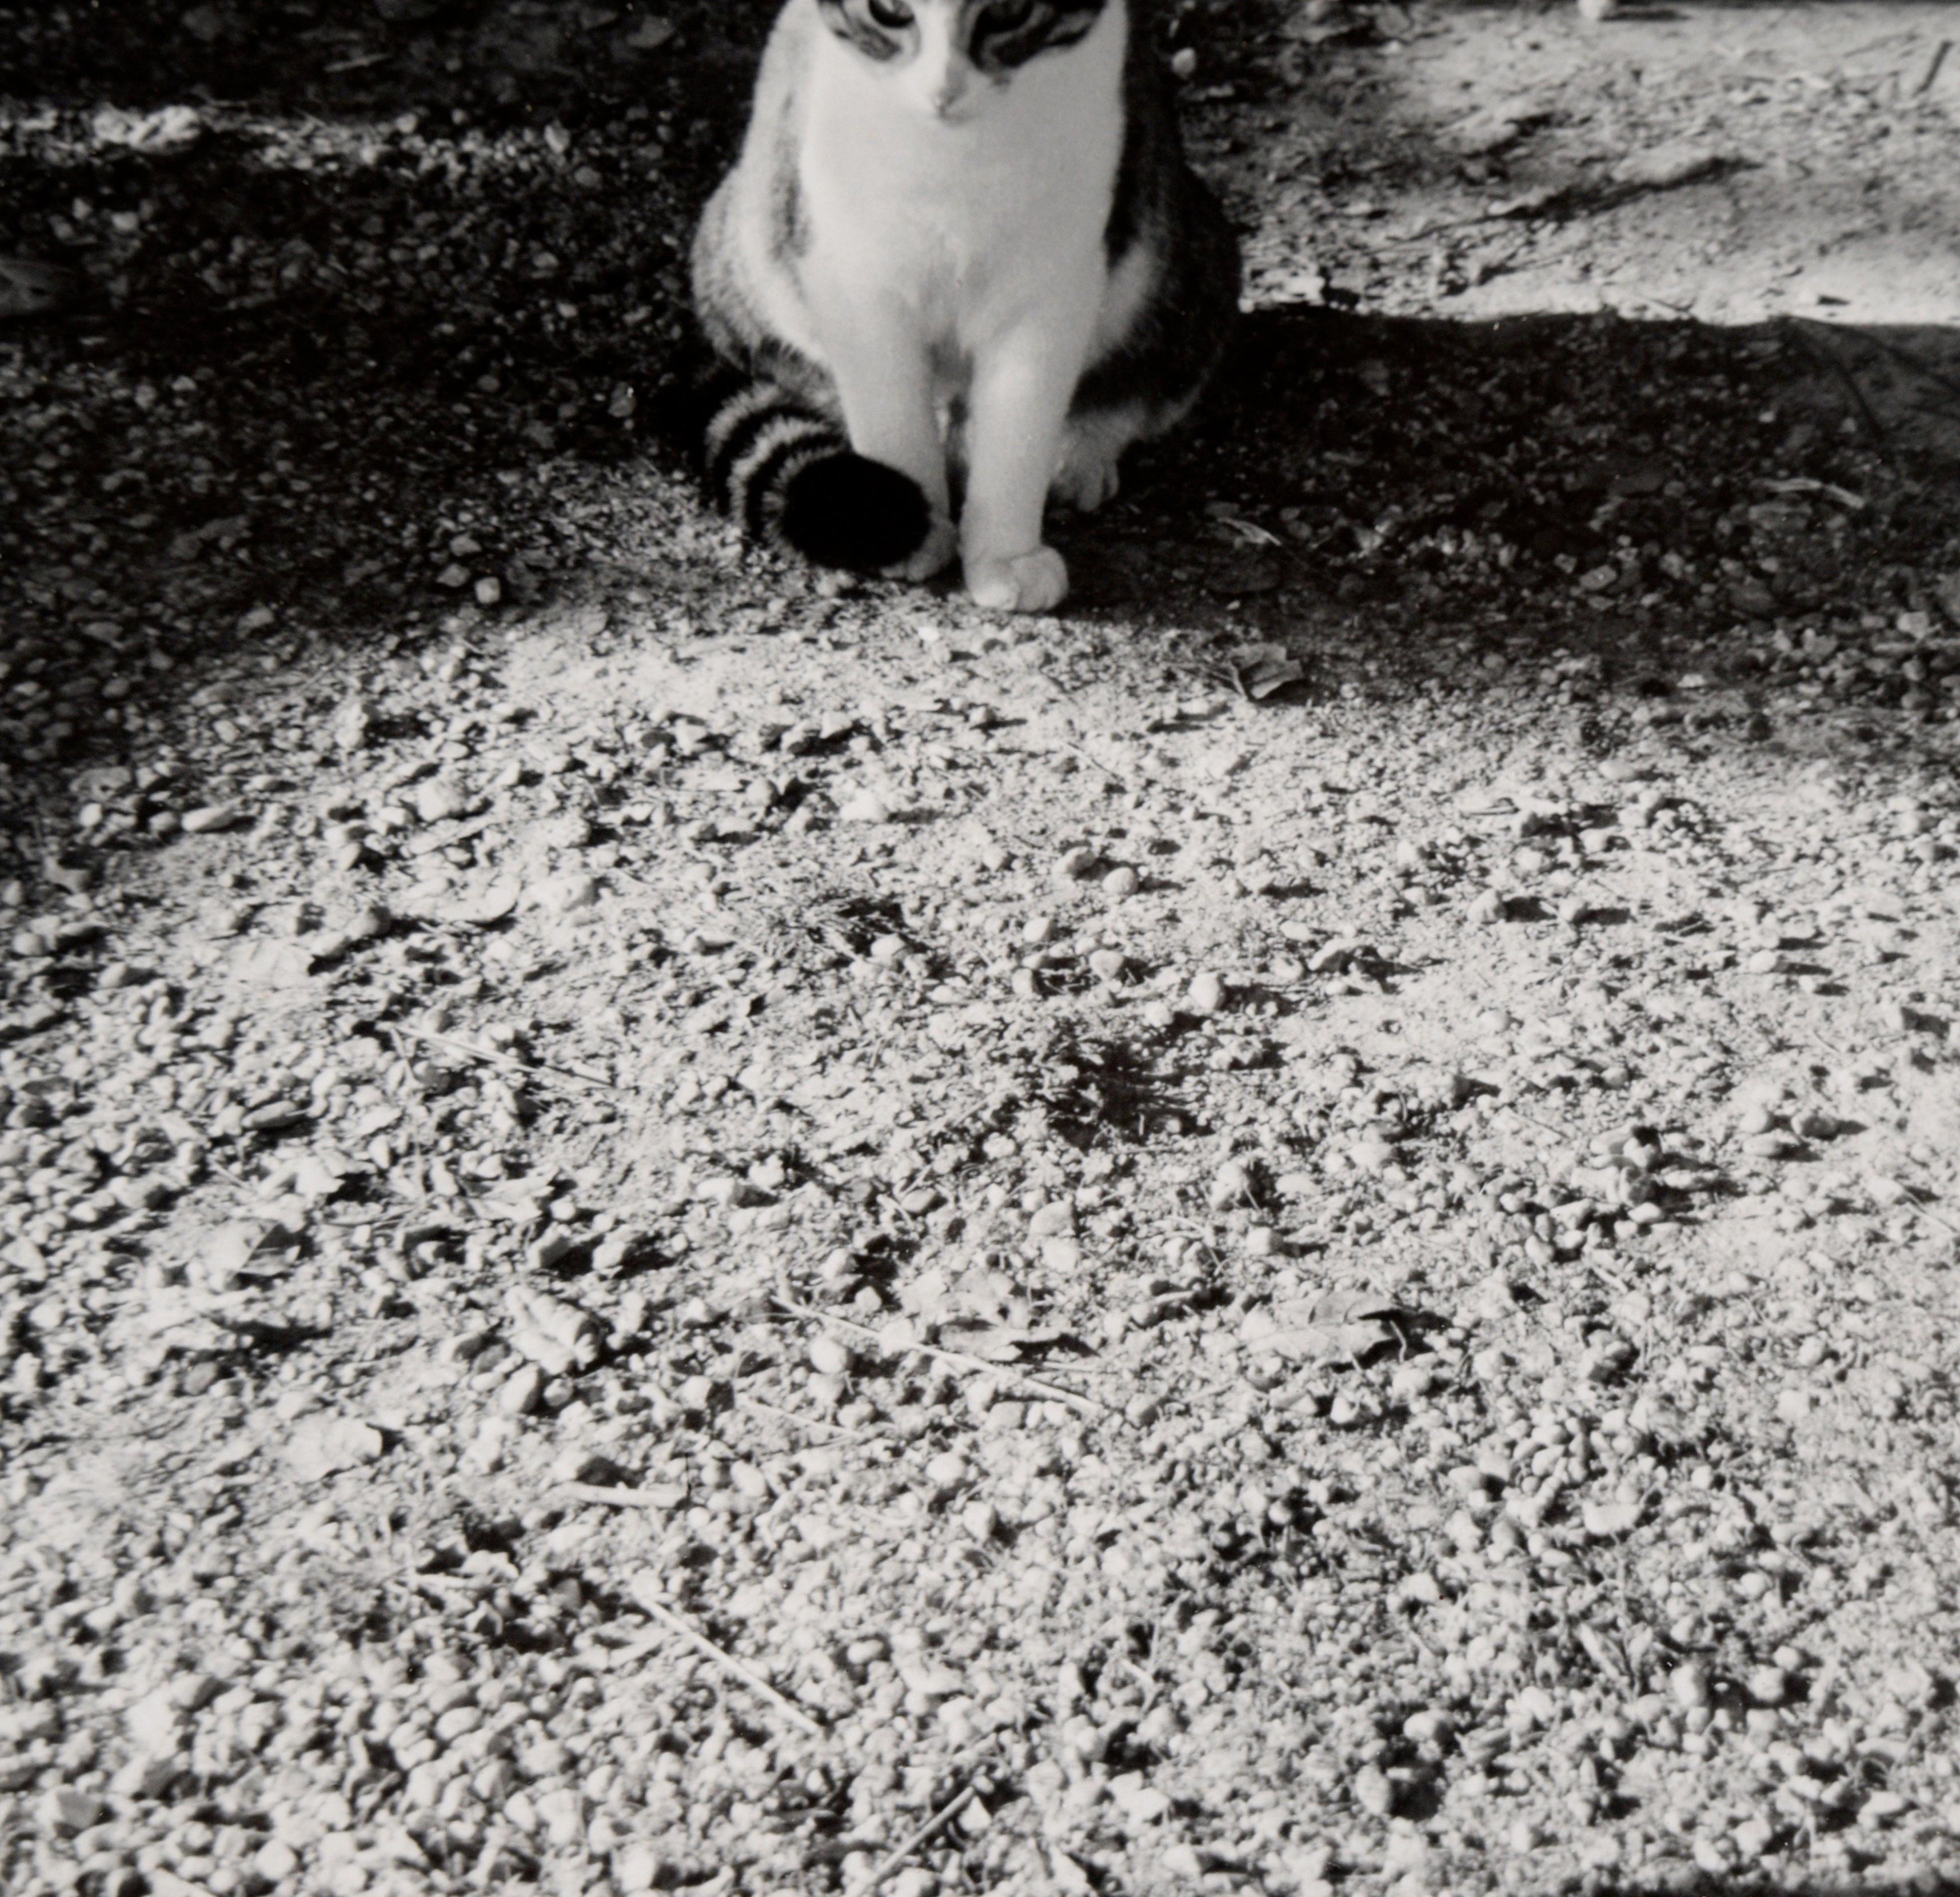 Black and white photo of a cat on a gravel road by Peter McArthur (American, b. 1947). In the top portion of the composition, a cat sits in the shadows of a gravel road. The exposure of the photograph perfectly captures the texture of the gravel,